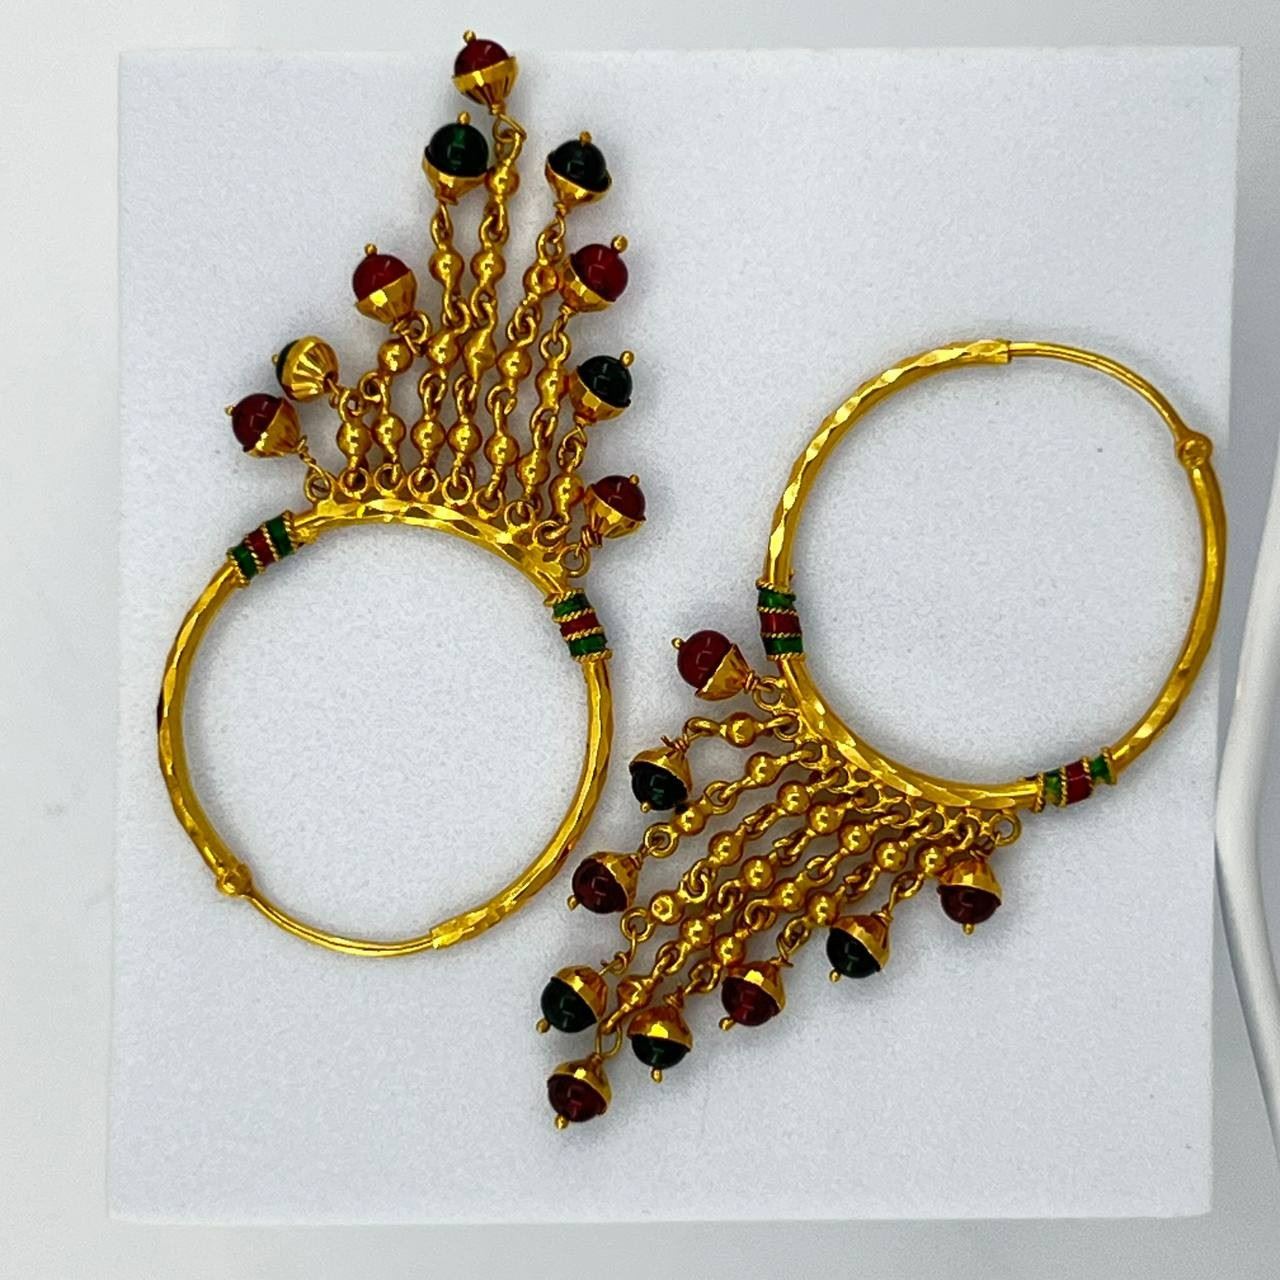 An Indian 13 gr of 22K gold loop Earring with charms. Red & green stones. $780